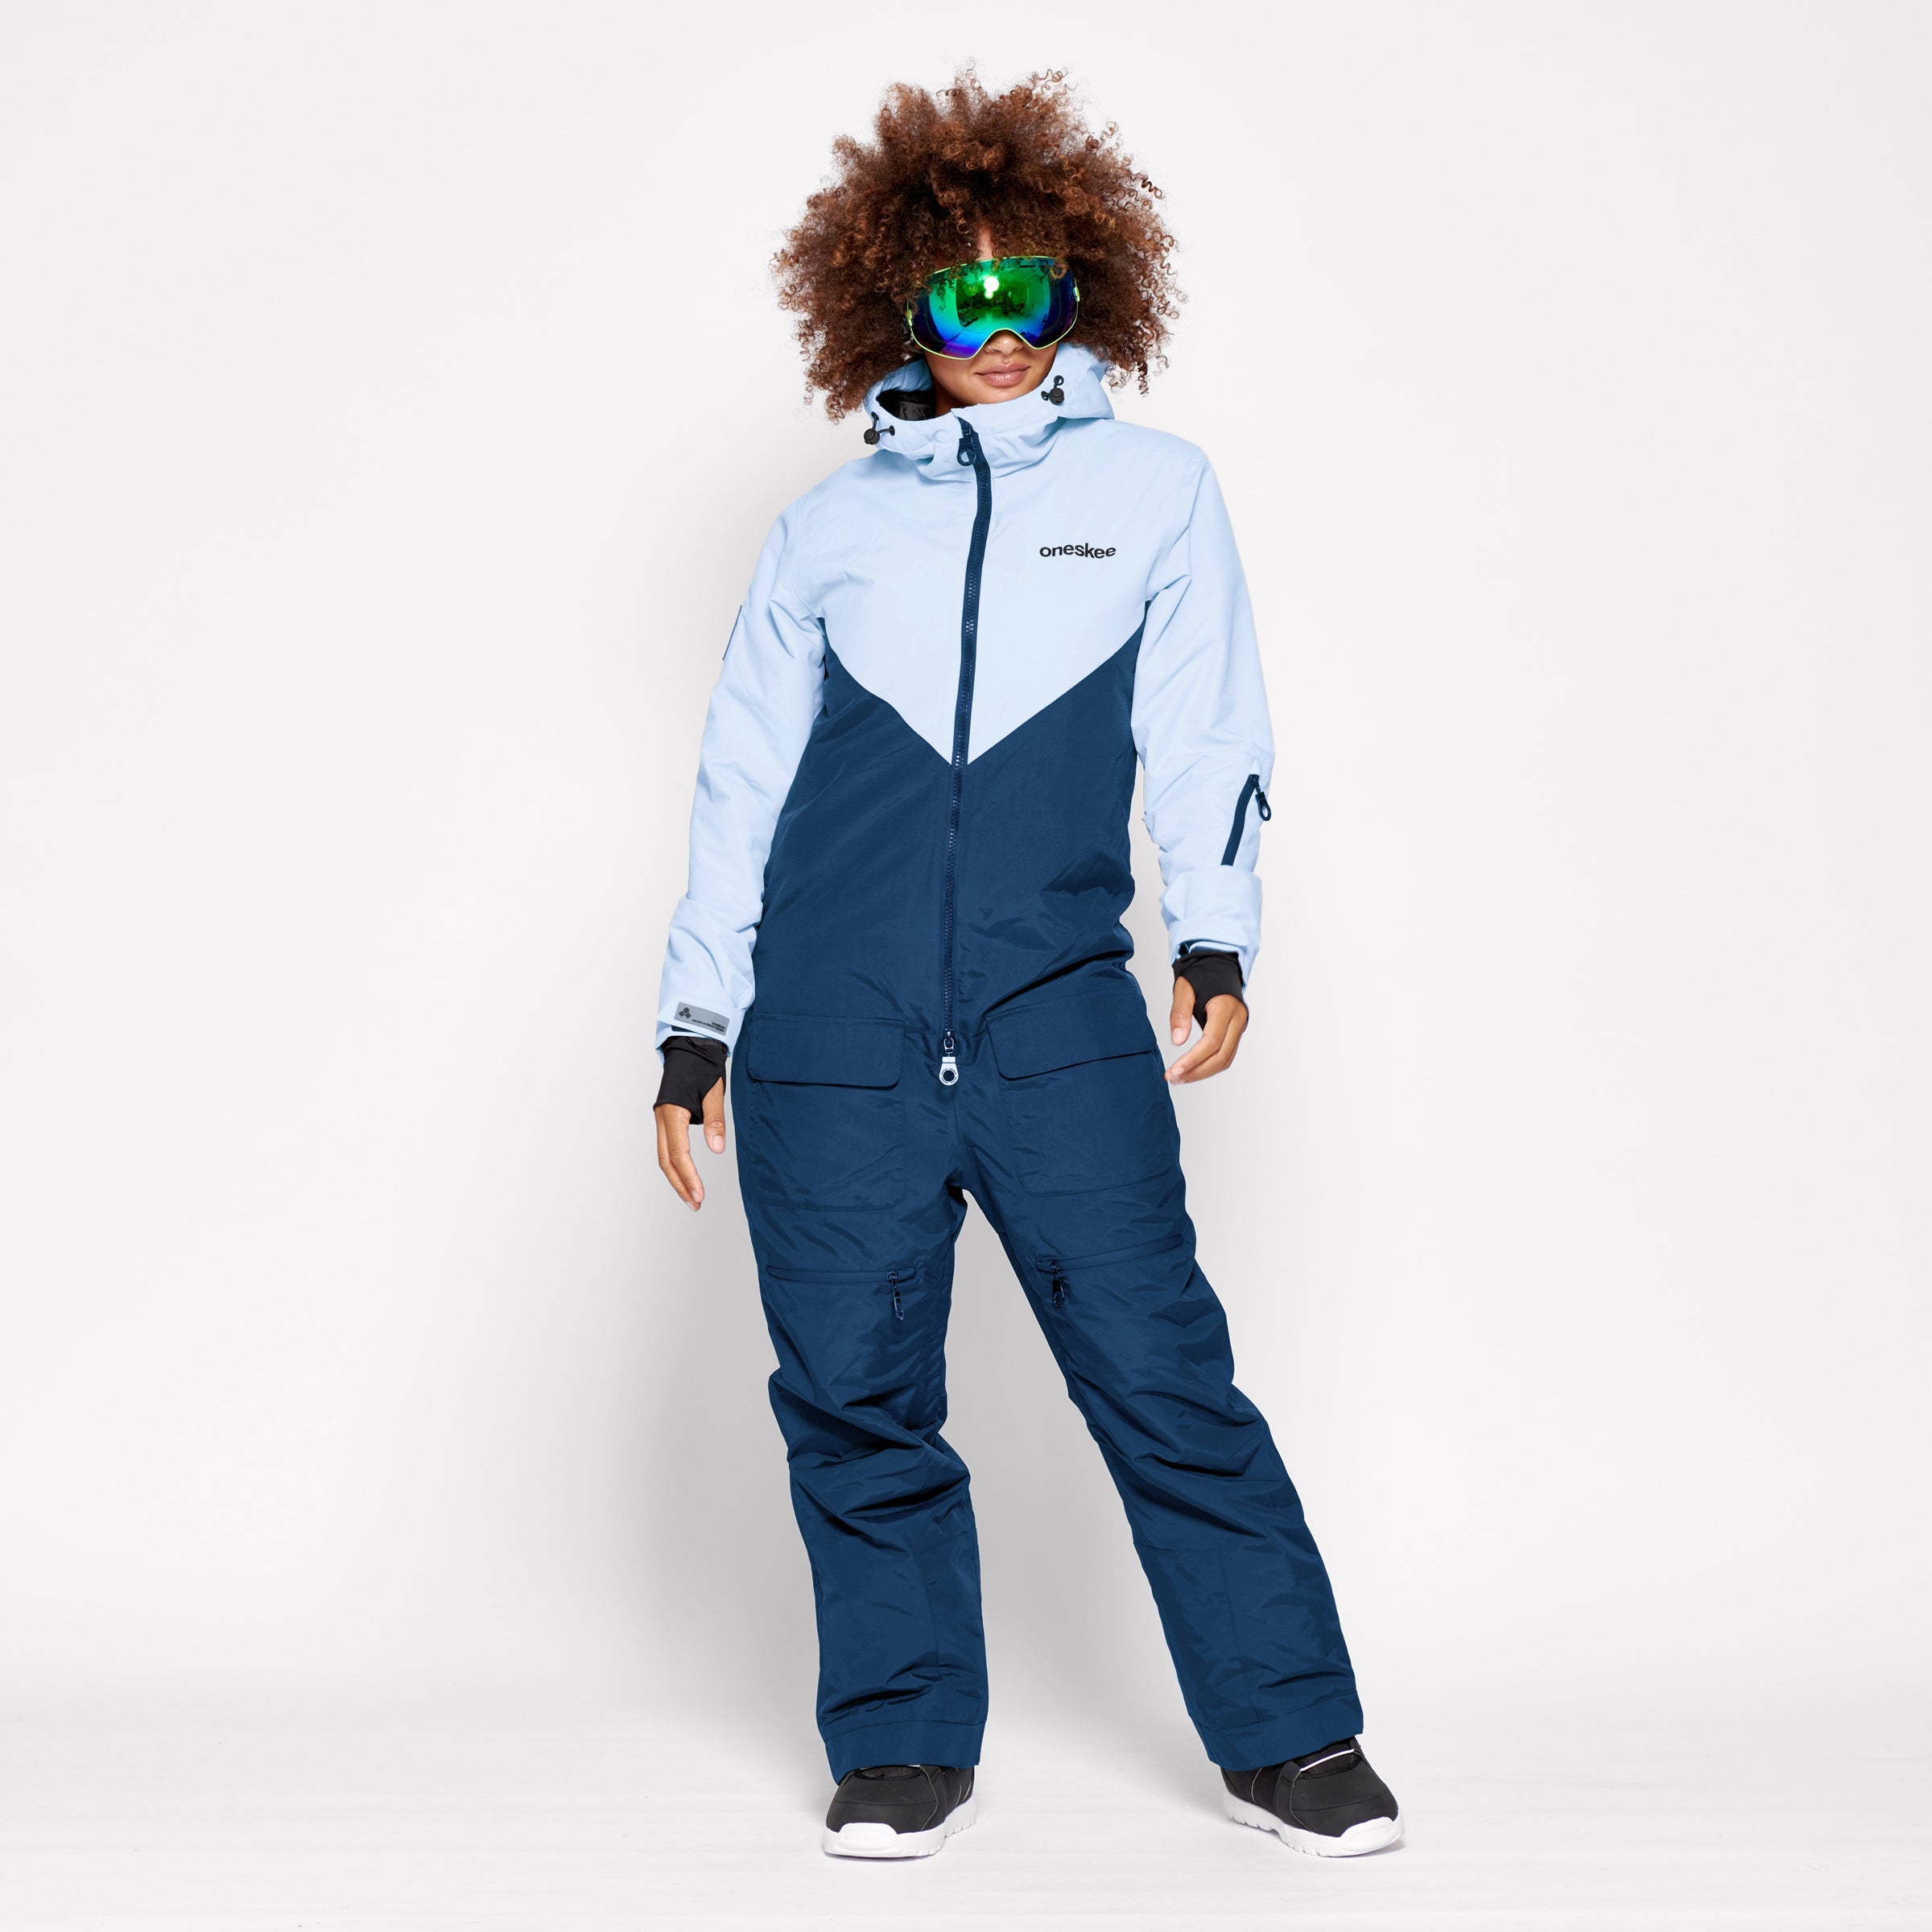 Women's Ski Suits - Dare to be Different - Oneskee EU